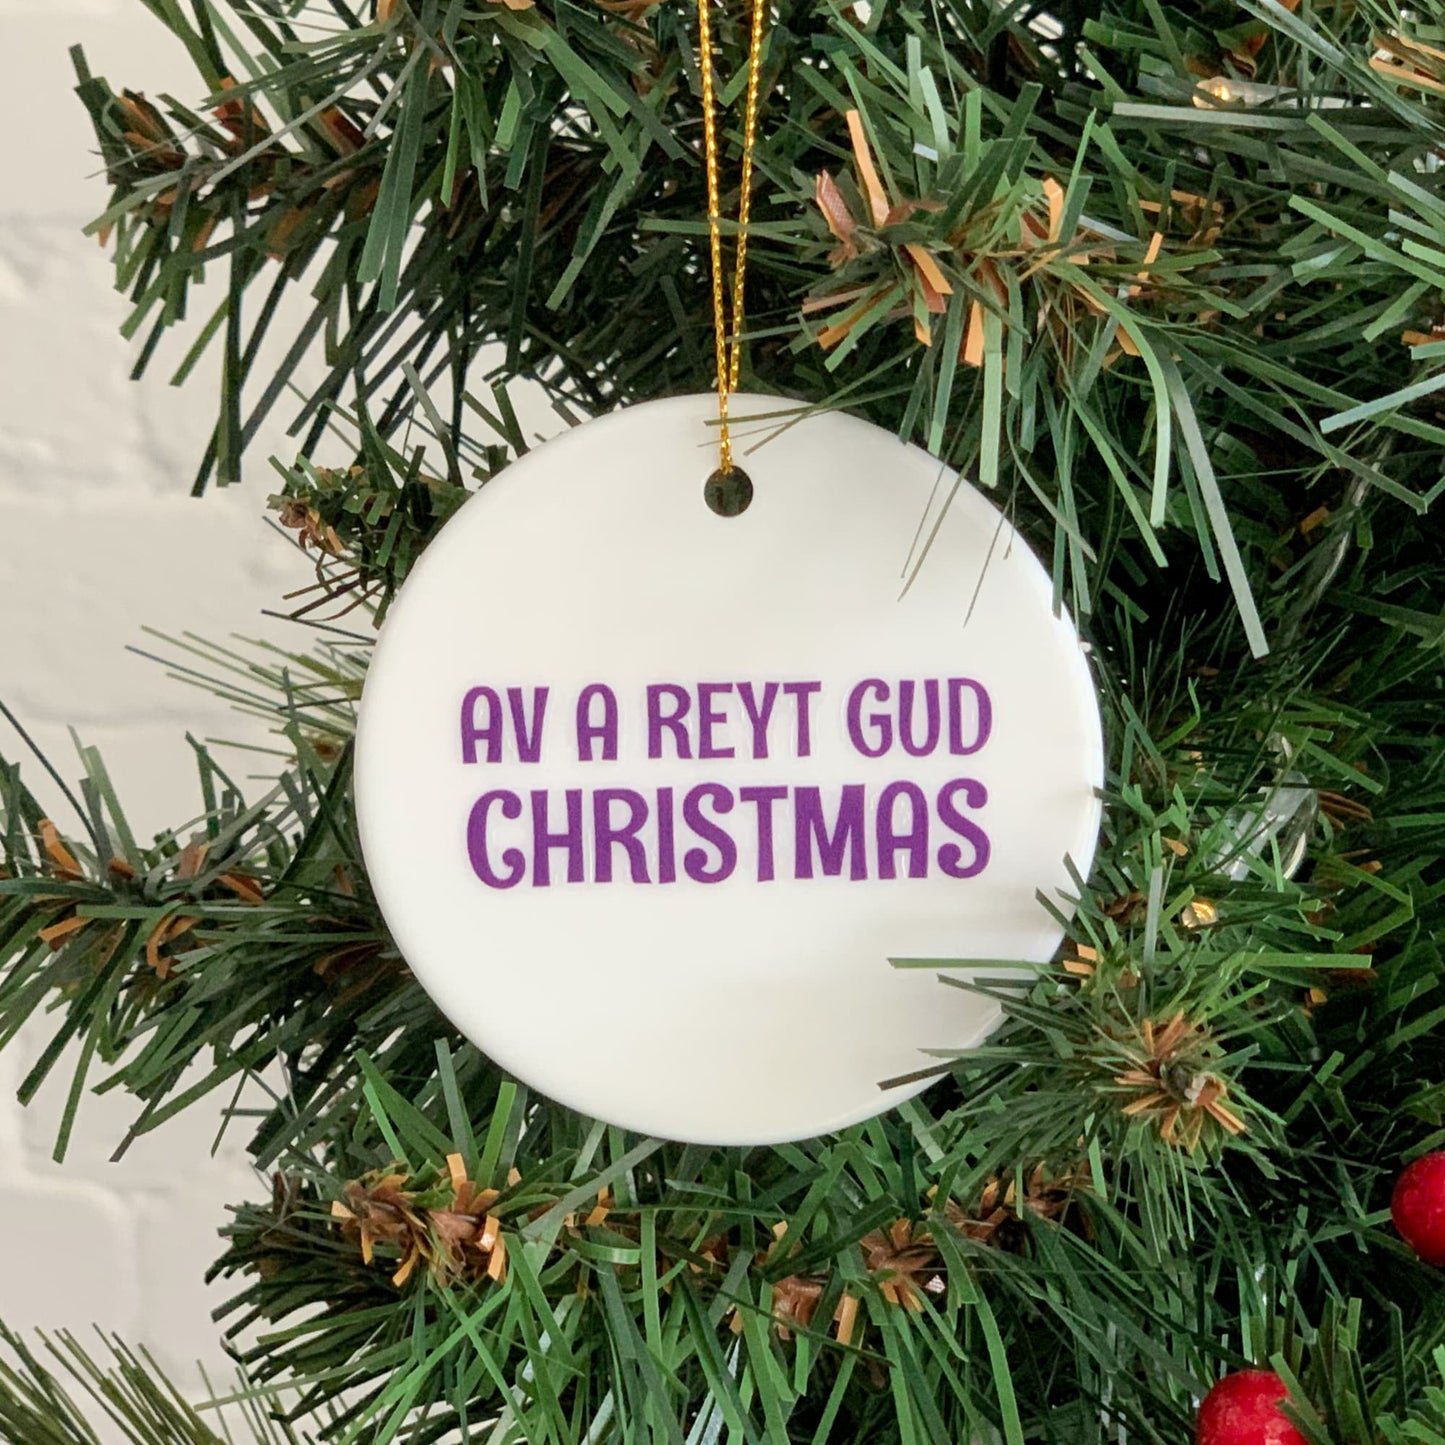 Set of 5 Yorkshire Dialect Luxury Christmas Ceramic Decorations - The Great Yorkshire Shop